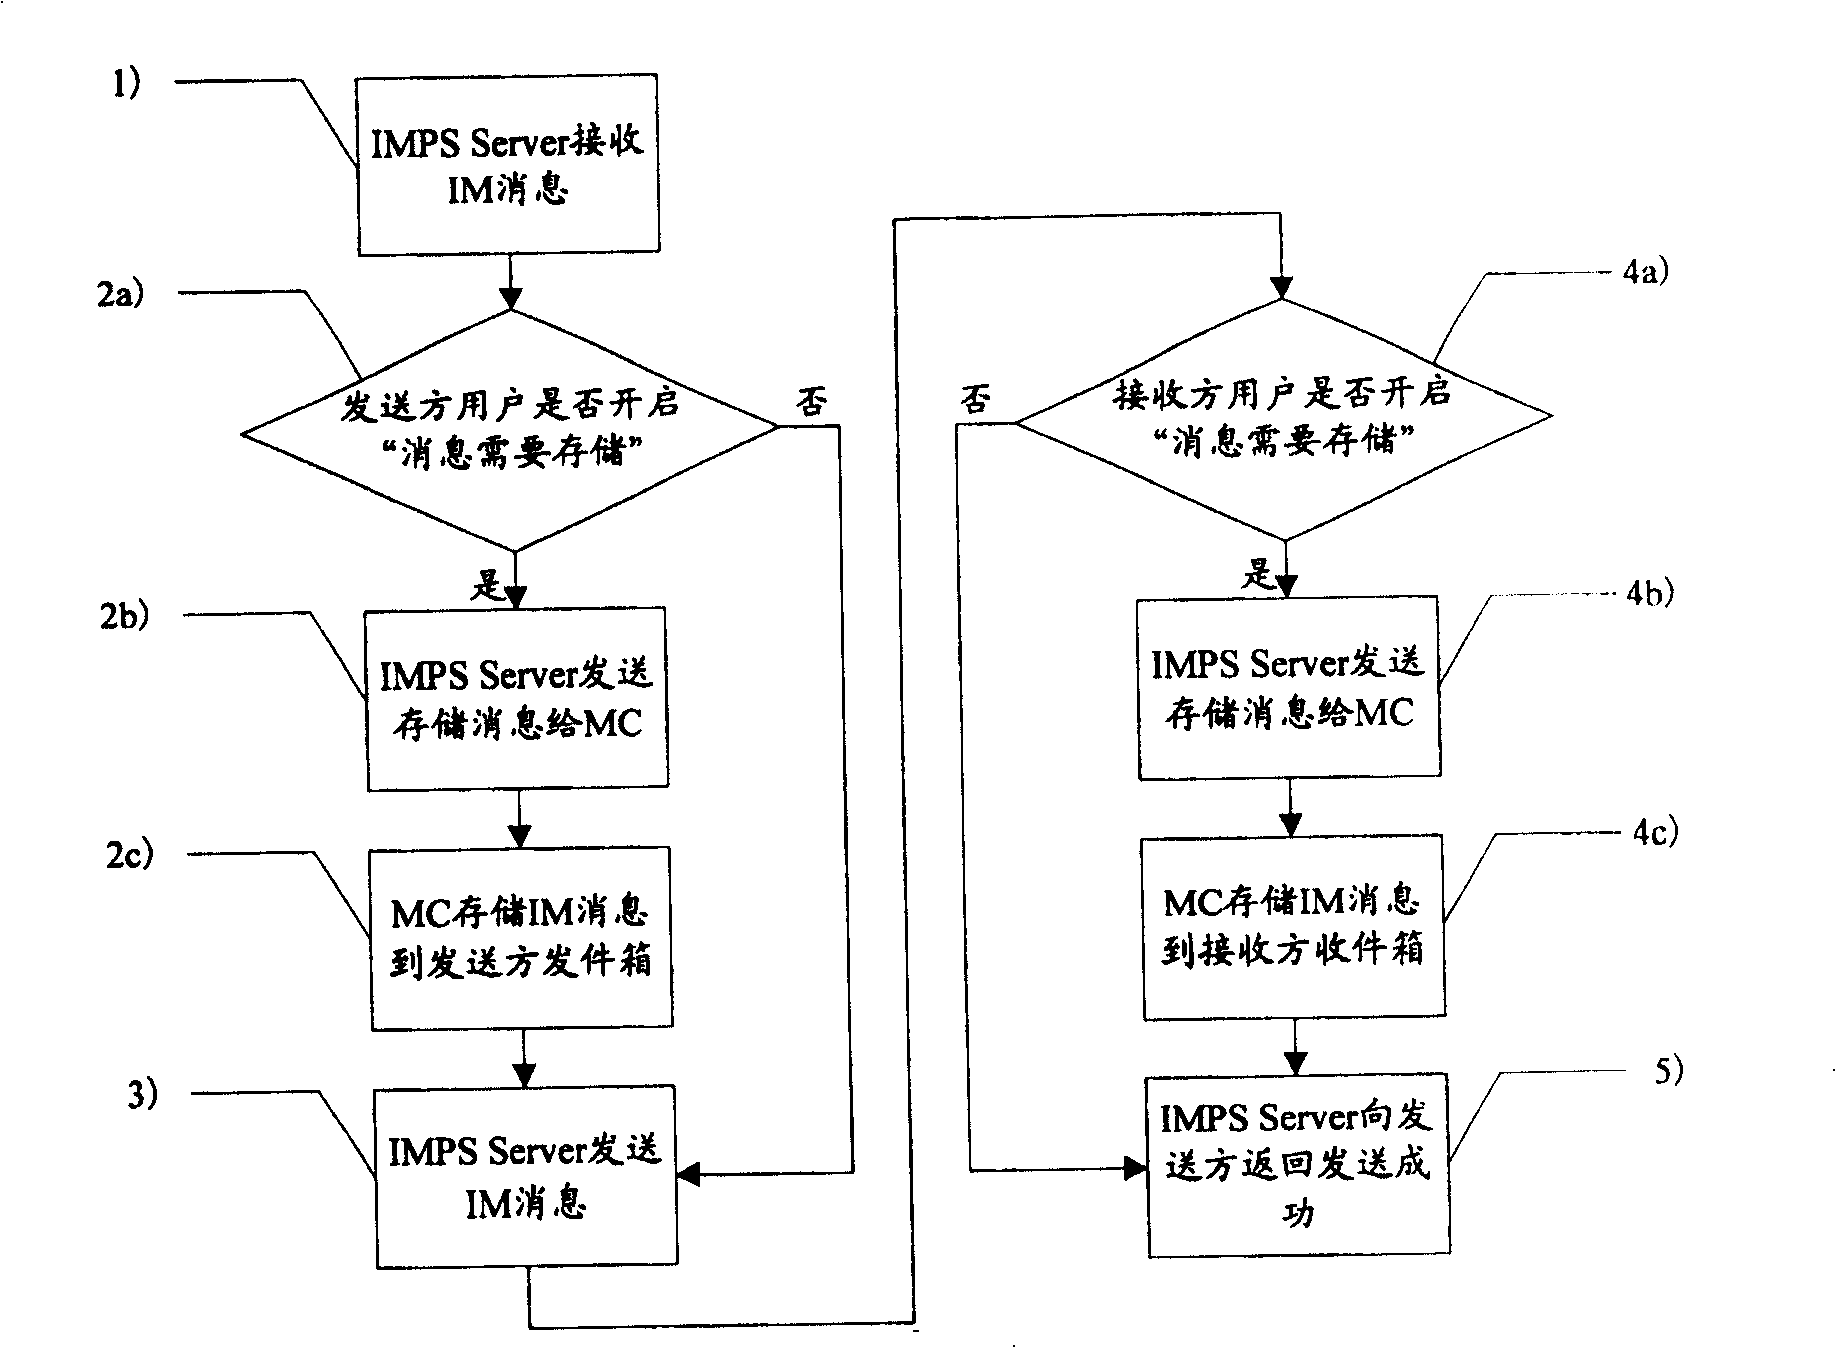 Instant message service processing method and service system